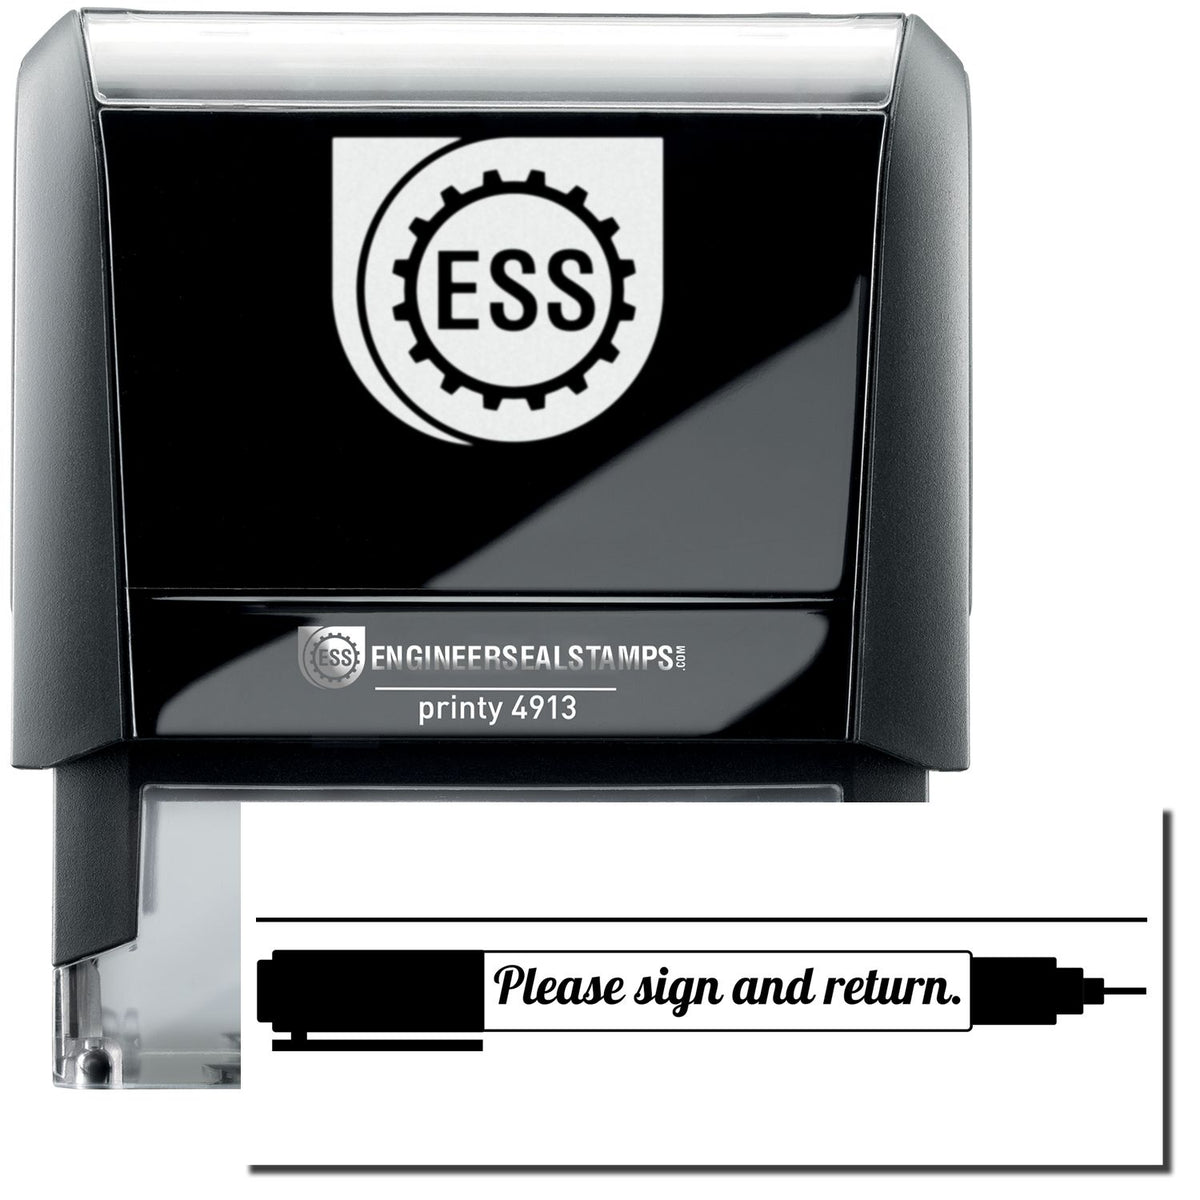 A self-inking stamp with a stamped image showing how the text &quot;Please sign and return.&quot; in a large font inside the image of a pen is displayed by it after stamping.